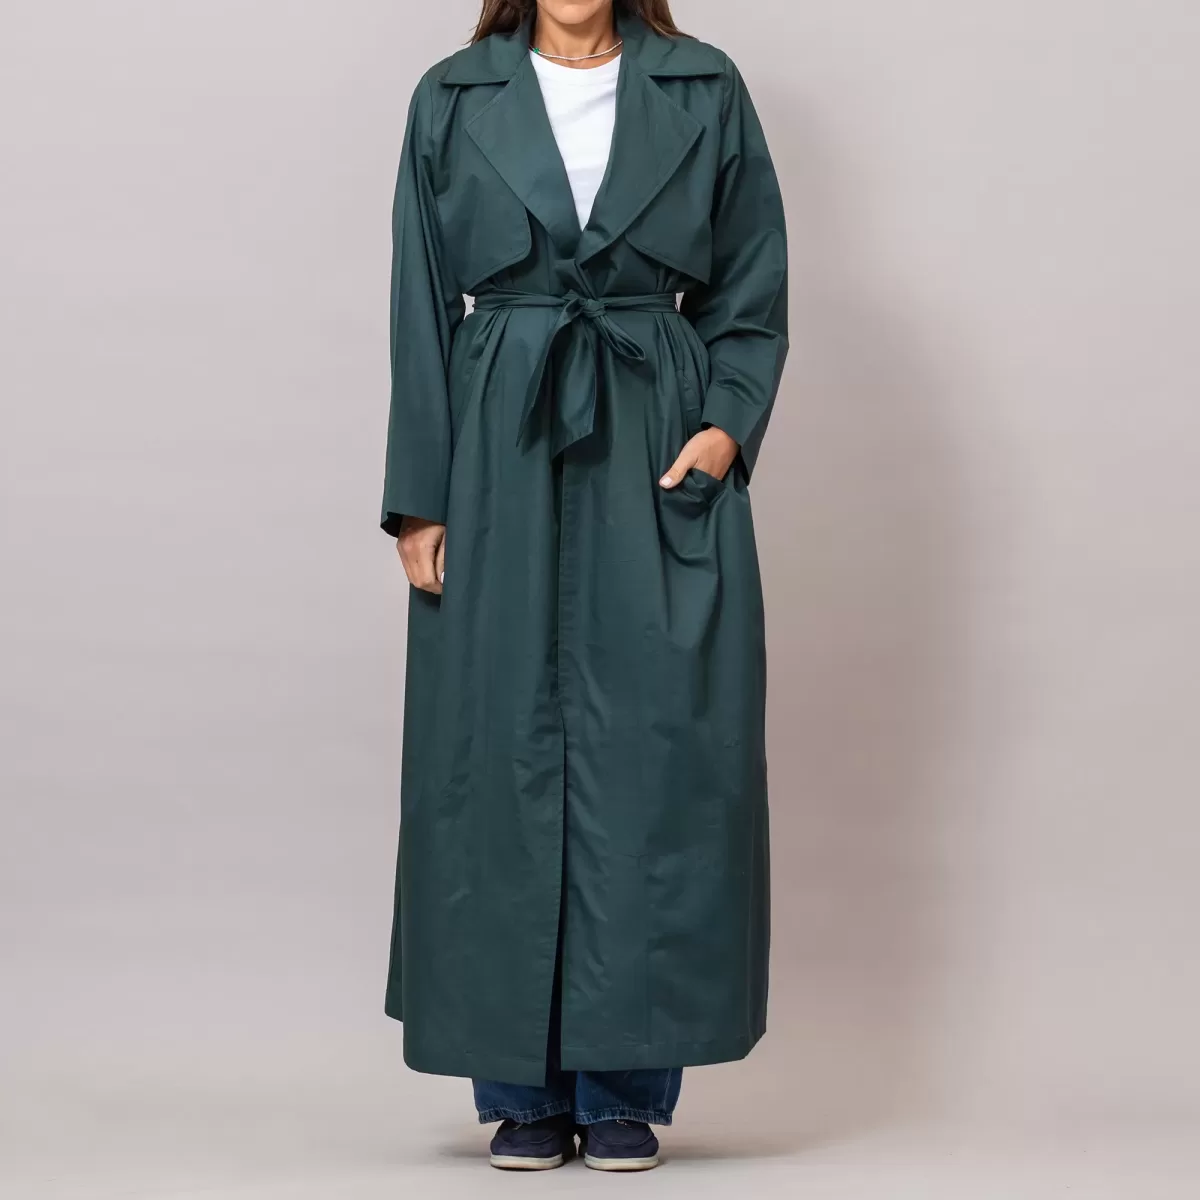 Duster Textured Cotton Viridian Green Coat with Gilet